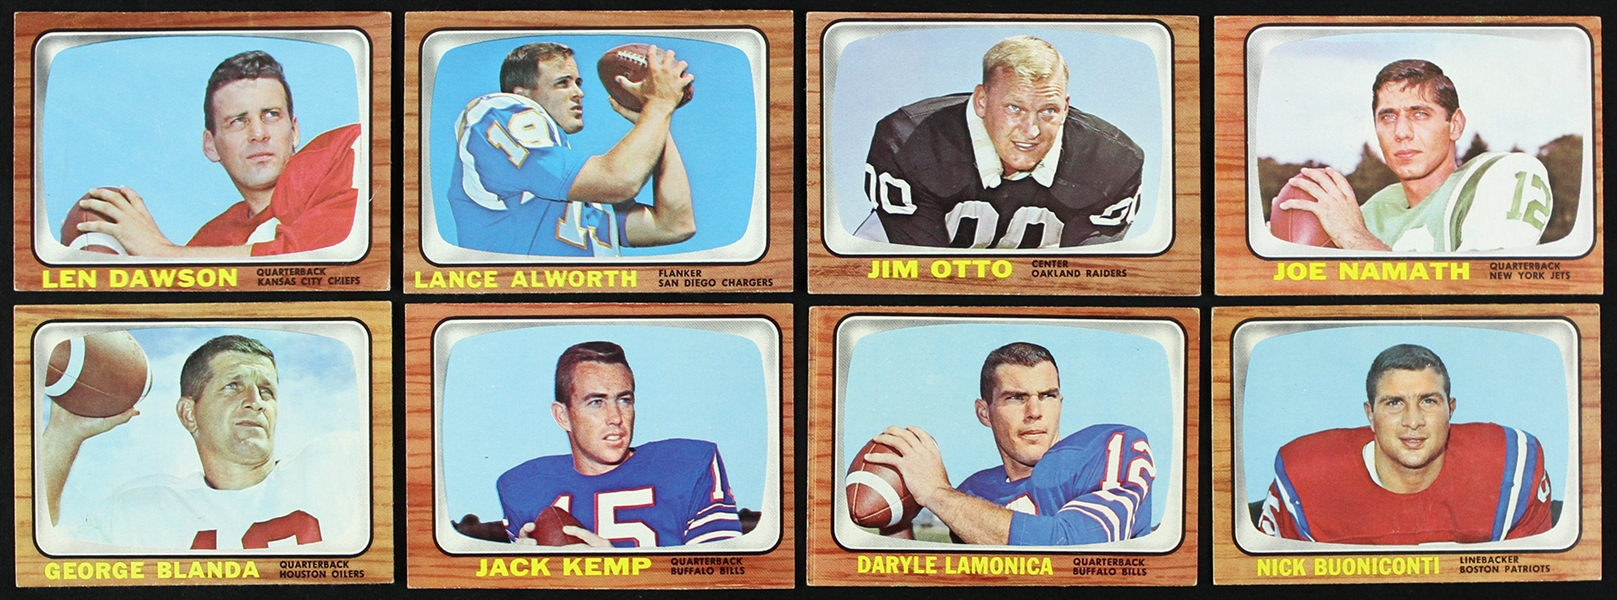 1966 Topps Football Trading Cards Complete Set (132/132)